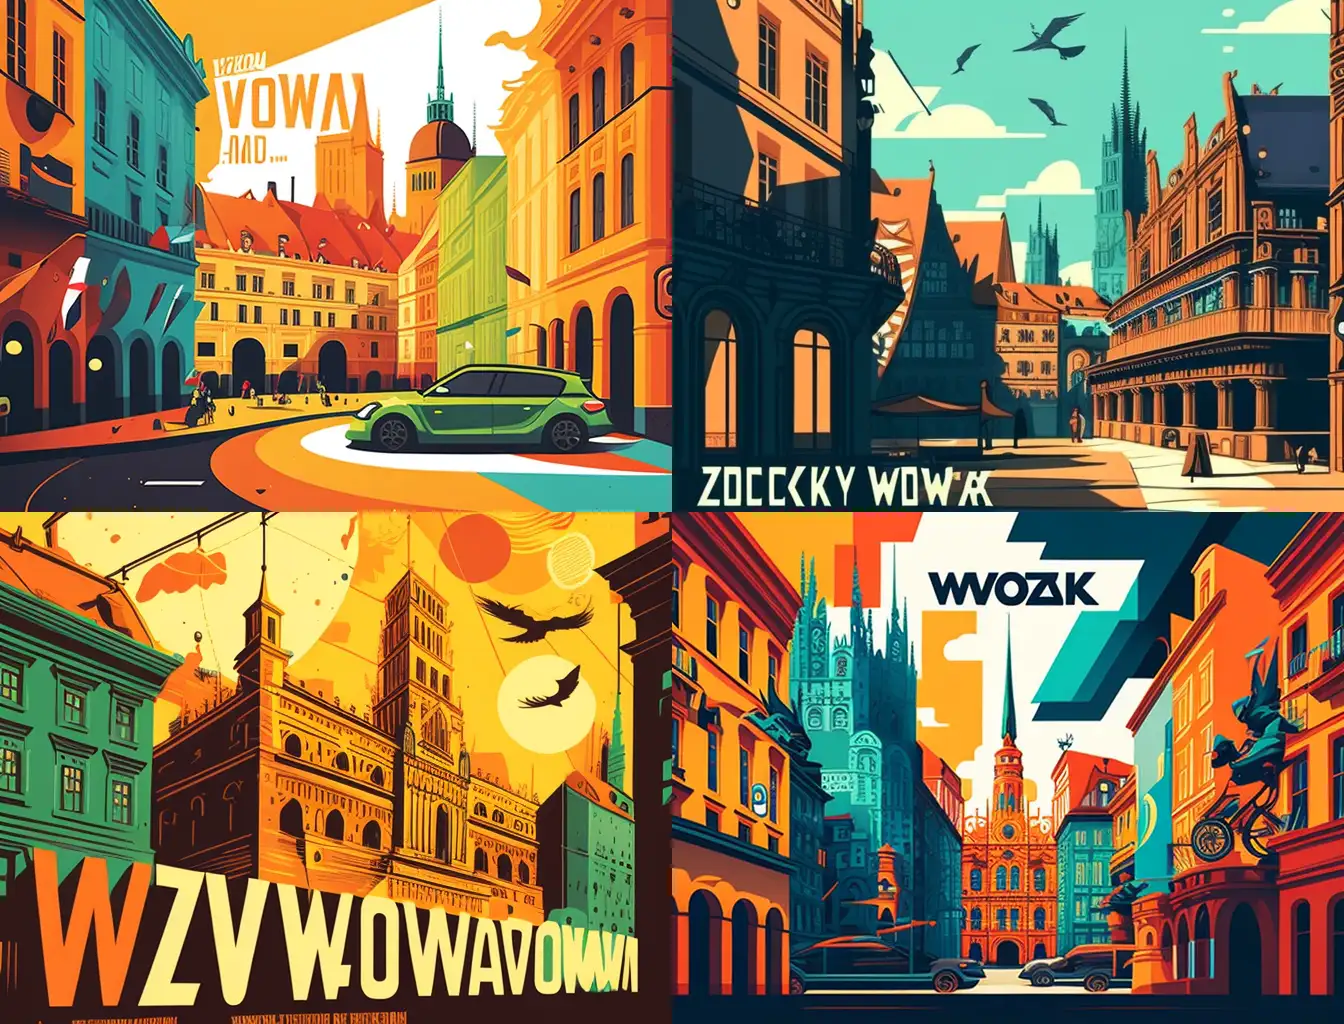 A vibrant and futuristic illustration of Wrocław's Old Town, showcasing the excitement and mystery of the urban game "Zakodowany Wrocław". The scene should prominently feature iconic landmarks such as the Rynek (Market Square) with the Old Town Hall, St. Elizabeth's Church, and the colorful townhouses.
Incorporate elements of technology and digital interfaces, such as game cards, smartphones with the dedicated app, and a semi-transparent overlay of a 6-digit code, hinting at the game's objective of cracking the city's code.
Depict a sense of adventure and intellectual challenge by including stylized pathways, bridges, and digital elements woven into the cityscape. However, avoid including any human figures or participants.
Use a vibrant, modern color palette with pops of bright neon colors to create an engaging and eye-catching visual. The overall style should be a mix of realistic architectural elements and stylized, futuristic digital components.
Dimensions: 1920x1070 pixels
--ar 16:9 --v 4 --q 2 --s 750